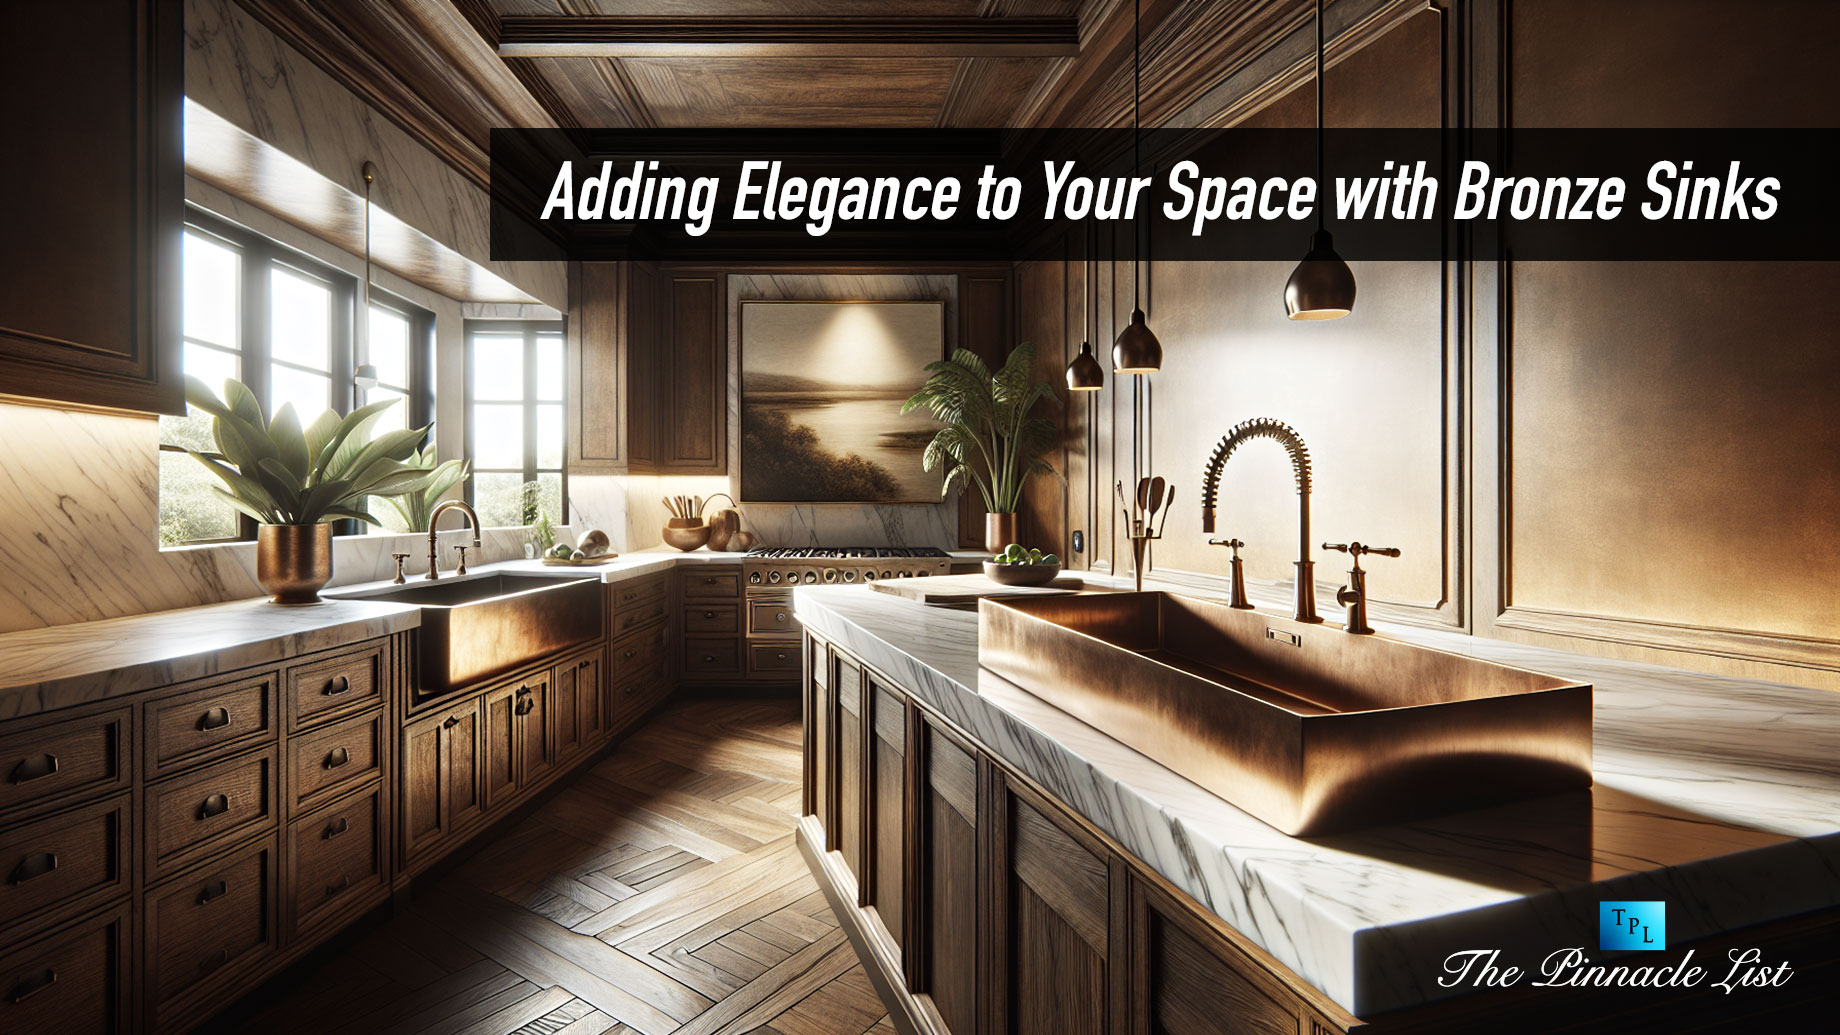 Adding Elegance to Your Space with Bronze Sinks